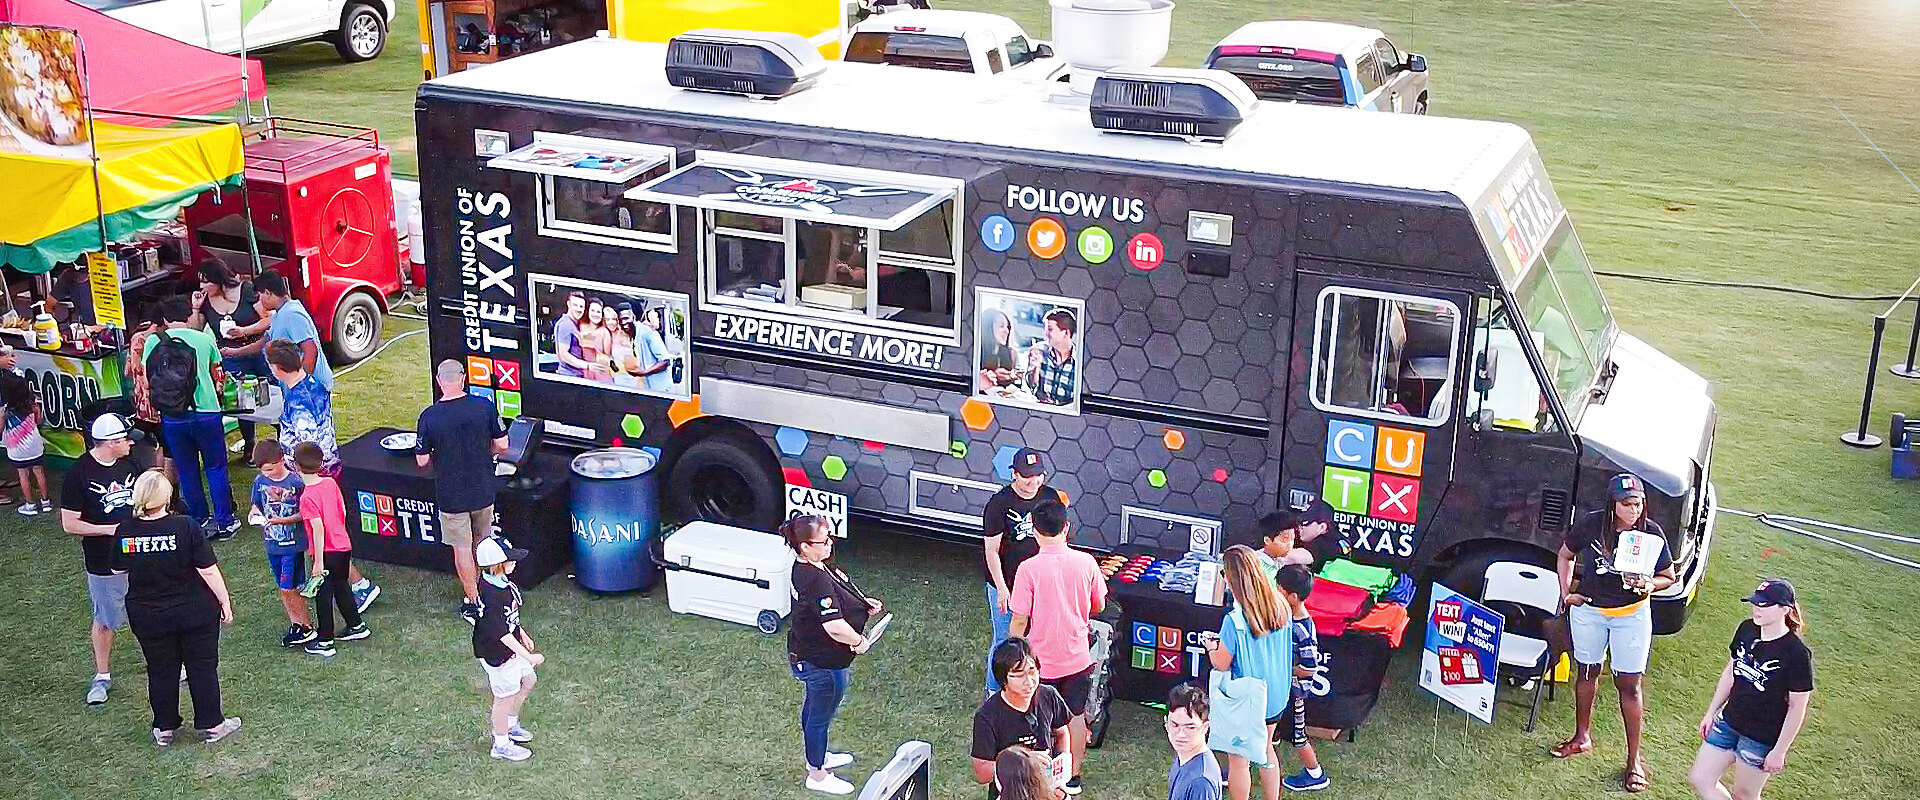 CUTX Food truck with people eating and standing around it